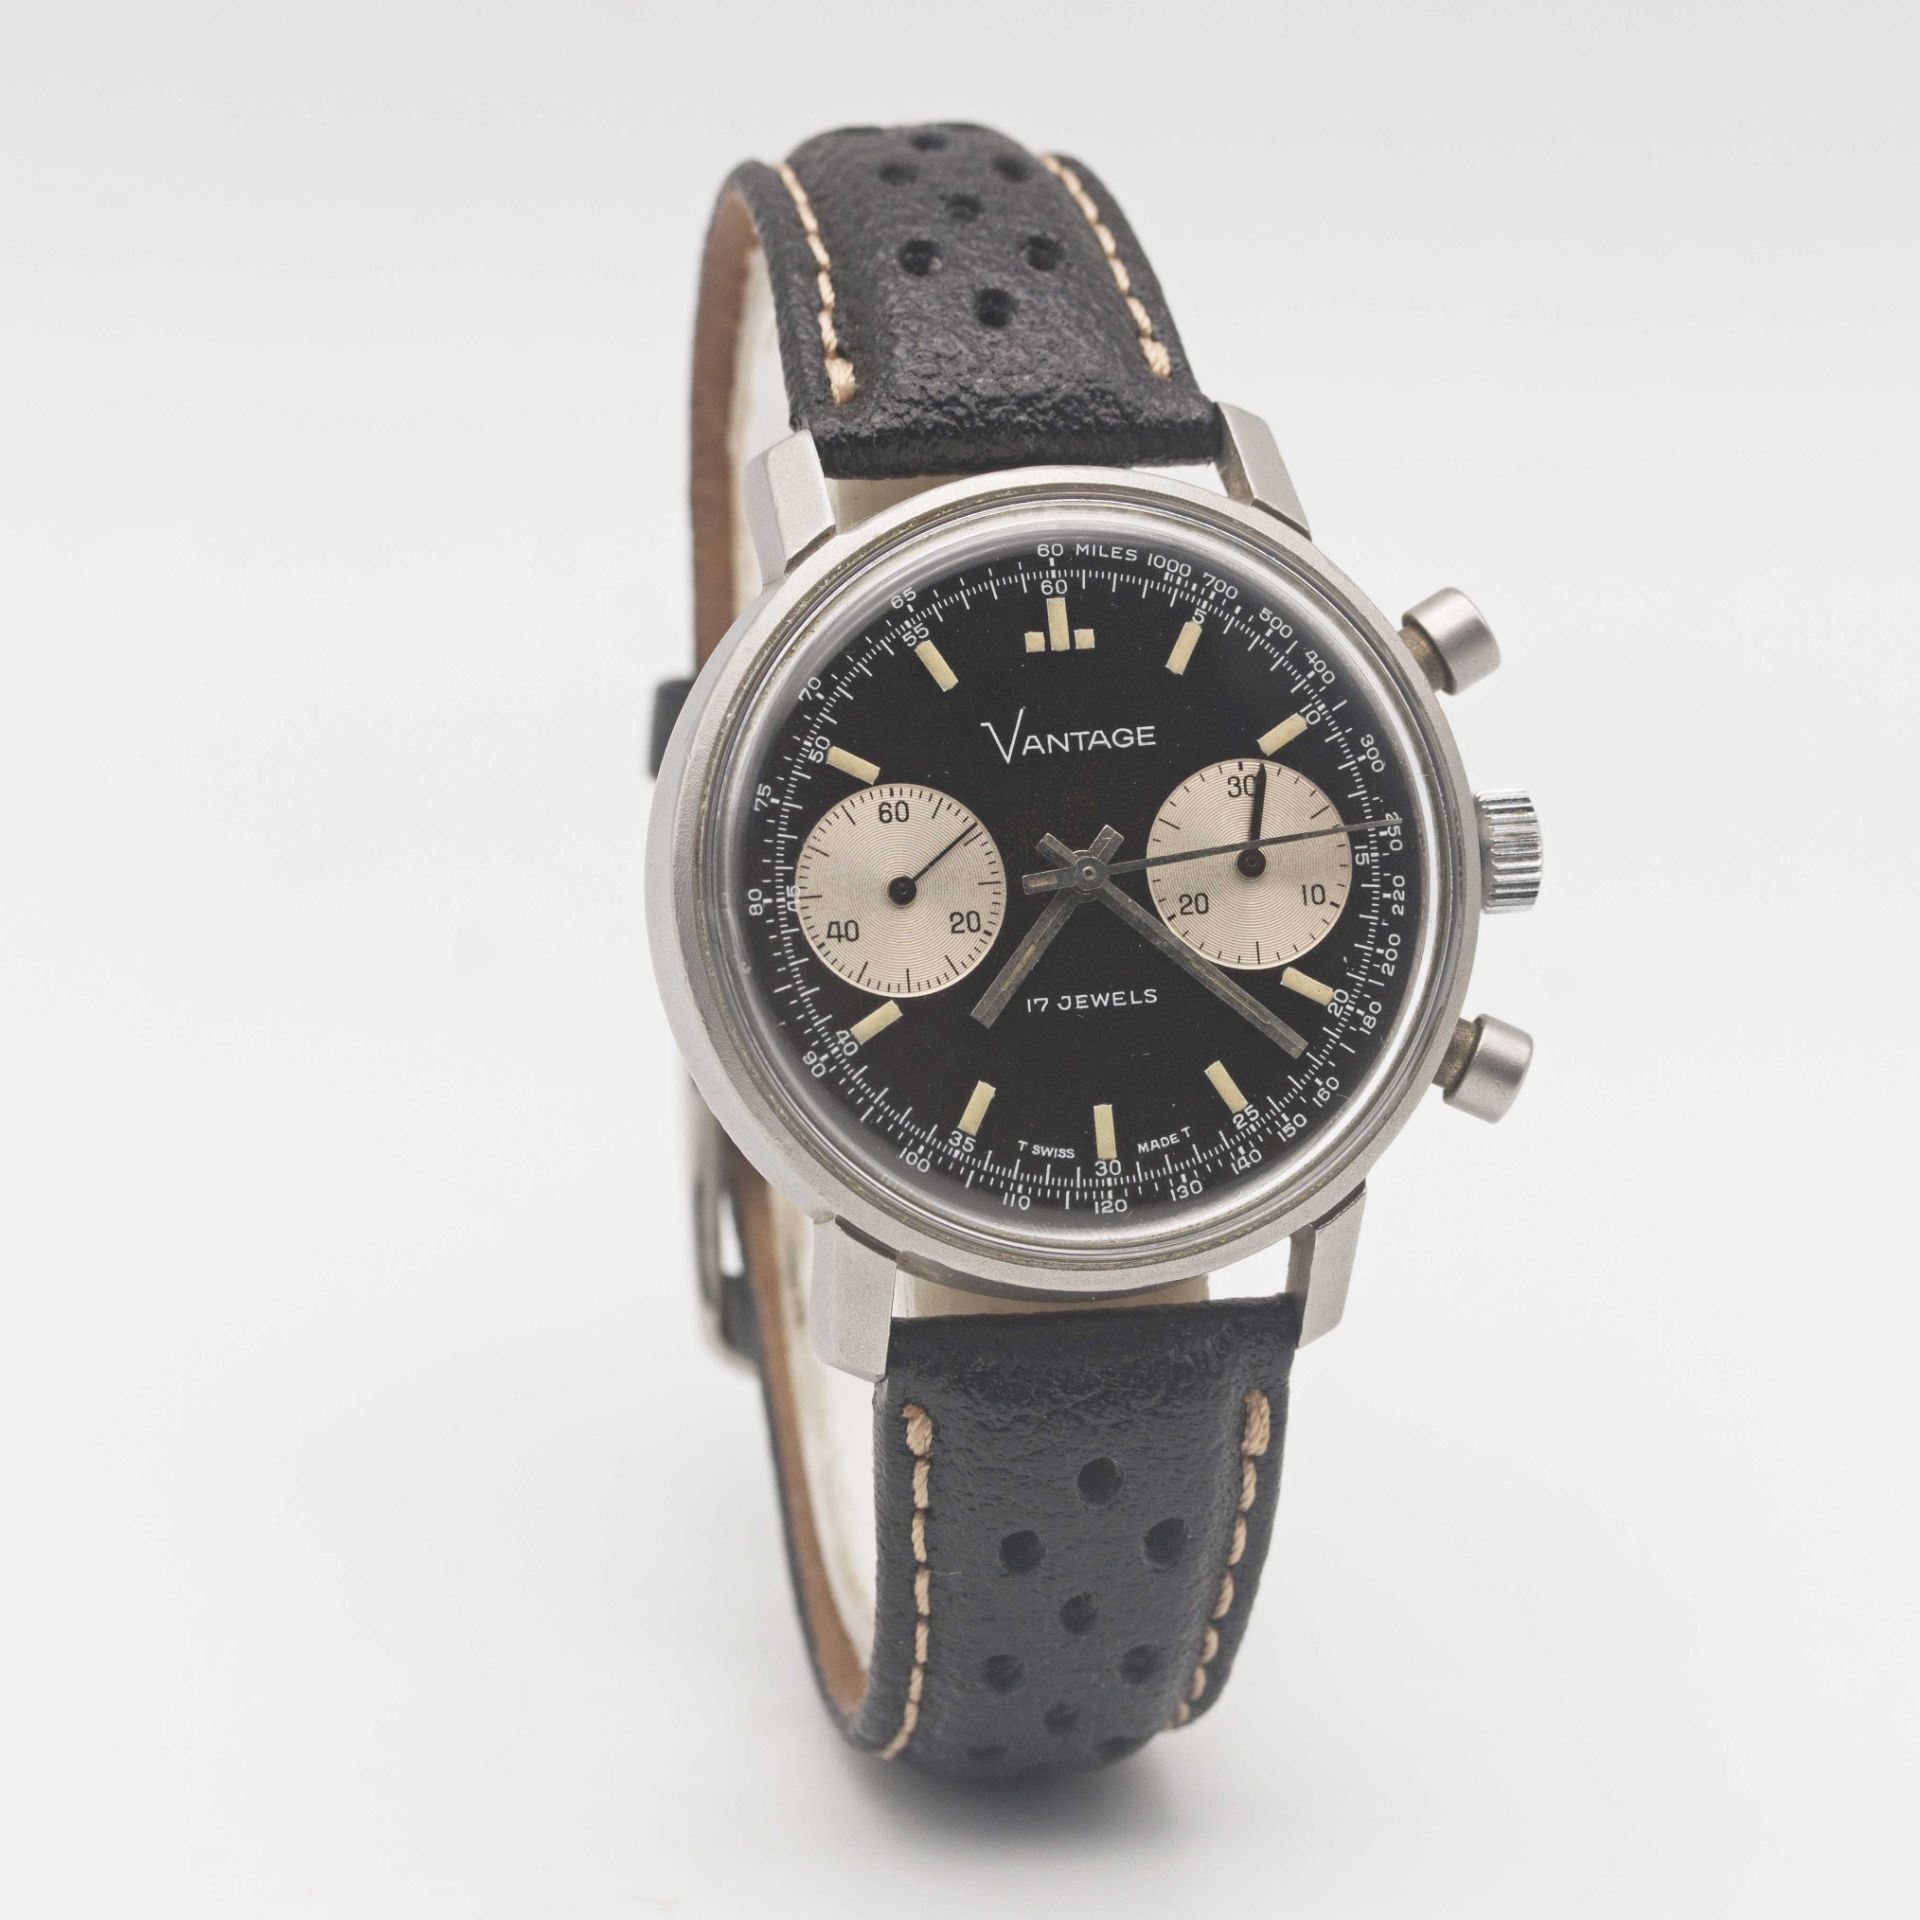 A GENTLEMAN'S STAINLESS STEEL VANTAGE CHRONOGRAPH WRIST WATCH CIRCA 1970, WITH GLOSS BLACK DIAL - Image 5 of 9